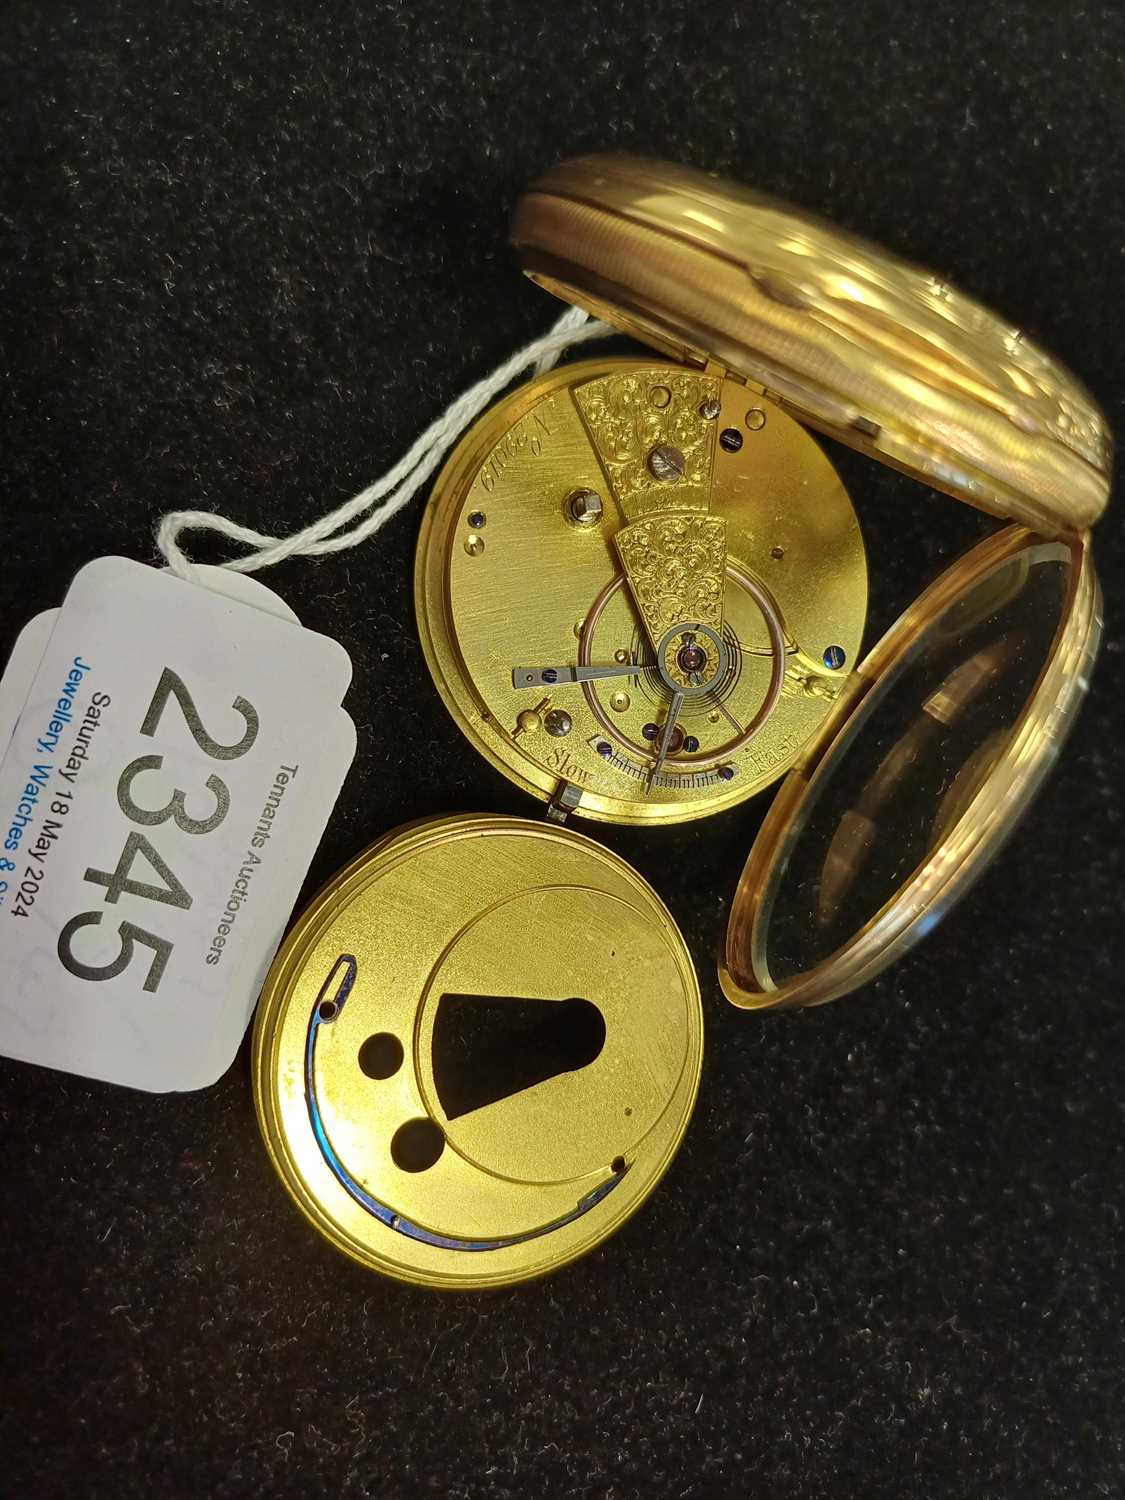 An 18 Carat Gold Open Faced Pocket Watch, 1872, single chain fusee lever movement, gold coloured - Image 3 of 3